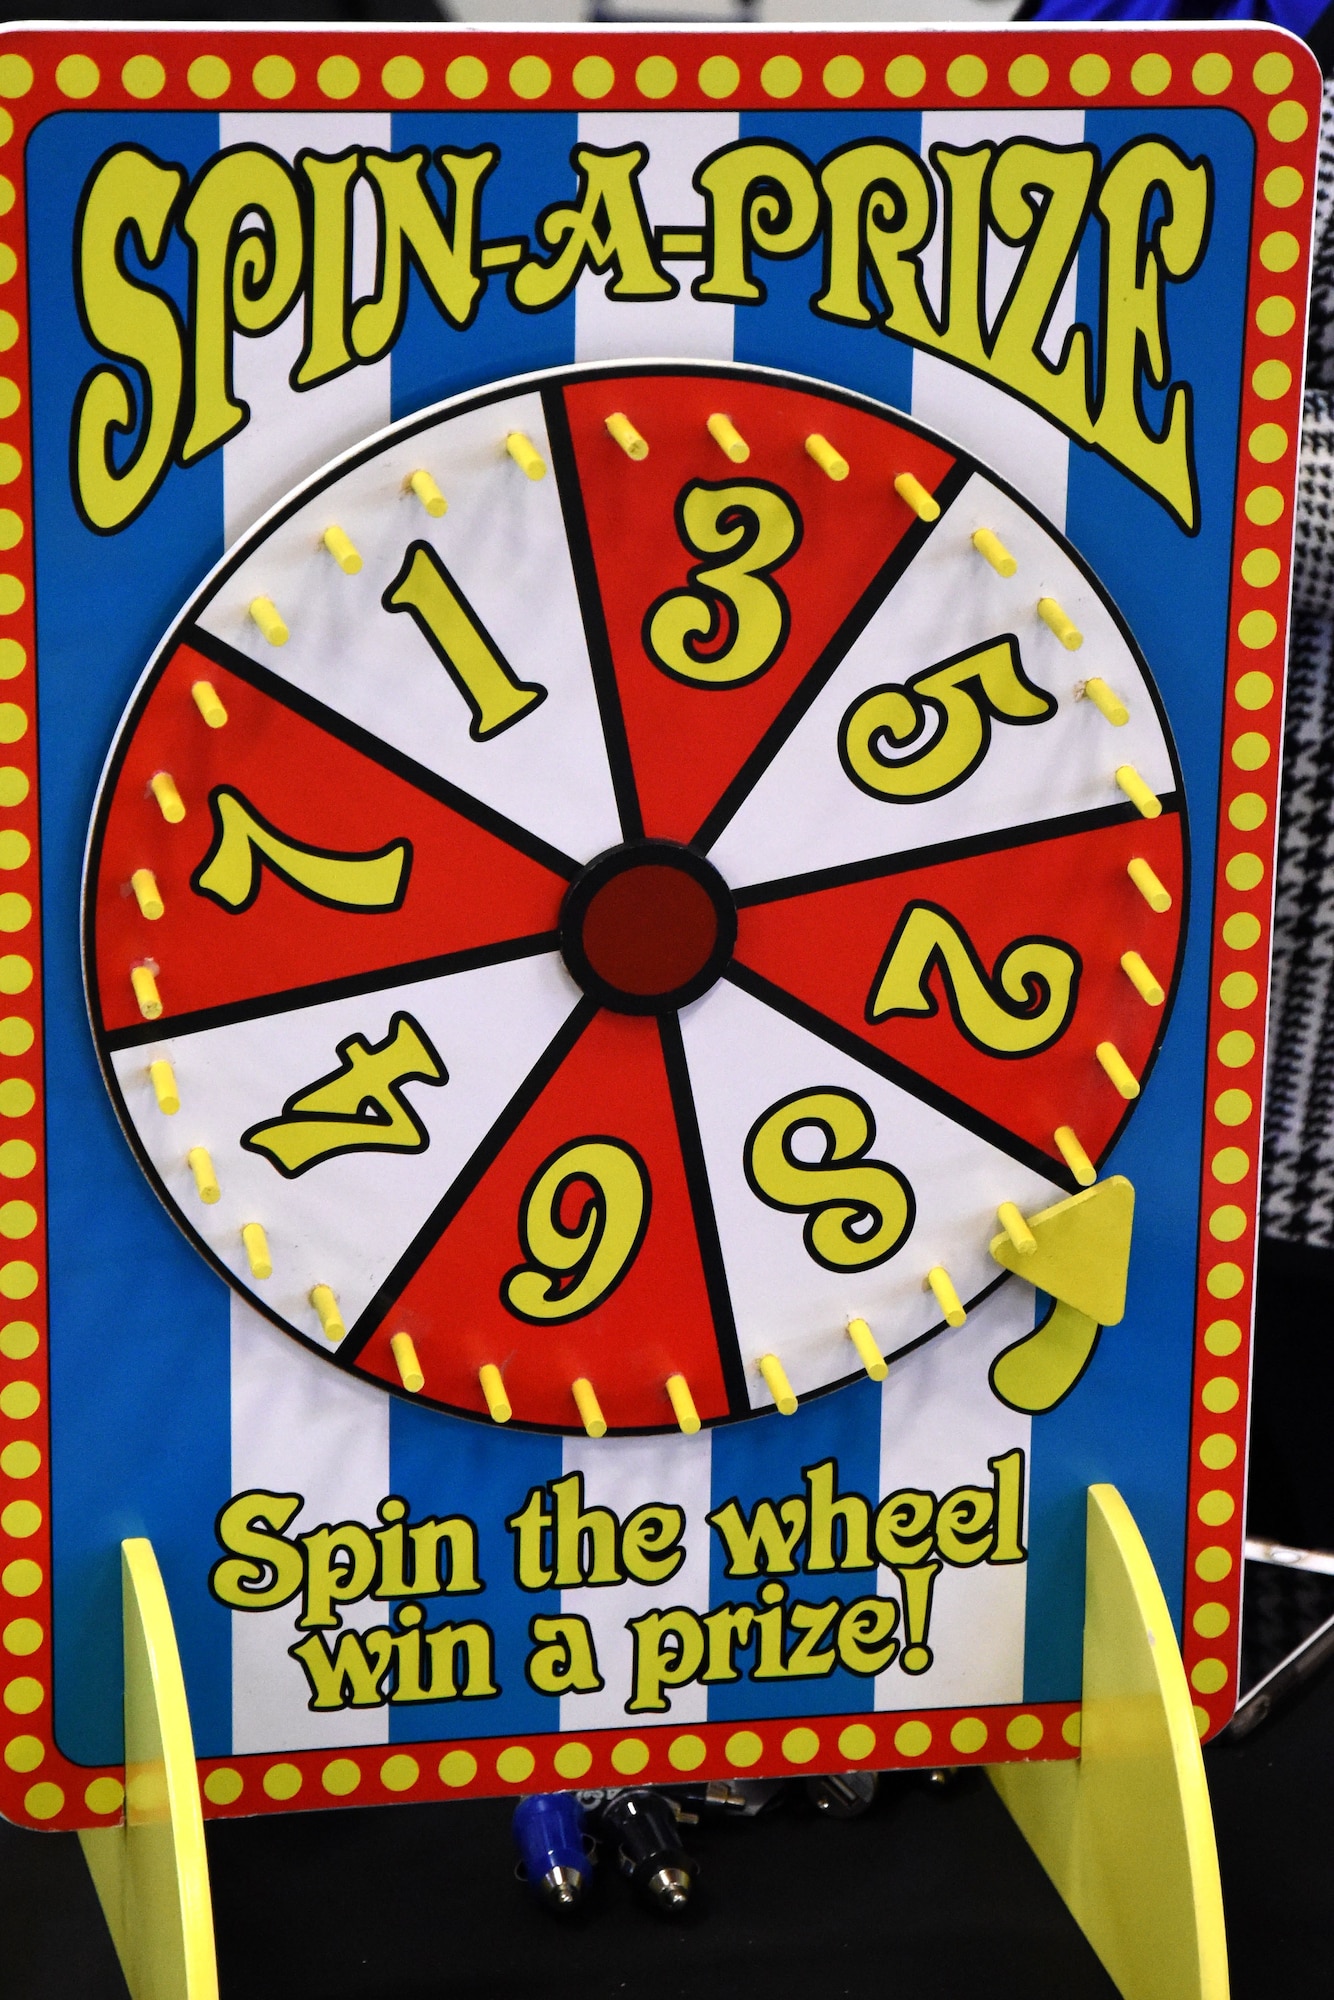 A spin wheel allows members attending the Volunteer Fair to spin for a prize at one of the booths set up at Carswell Field House on Goodfellow Air Force Base, Texas, 
April 11, 2018. Booths and games were set up to inform attendees of the different organizations on and off base. (U.S. Air Force photo by Airman 1st Class Seraiah Hines/Released)